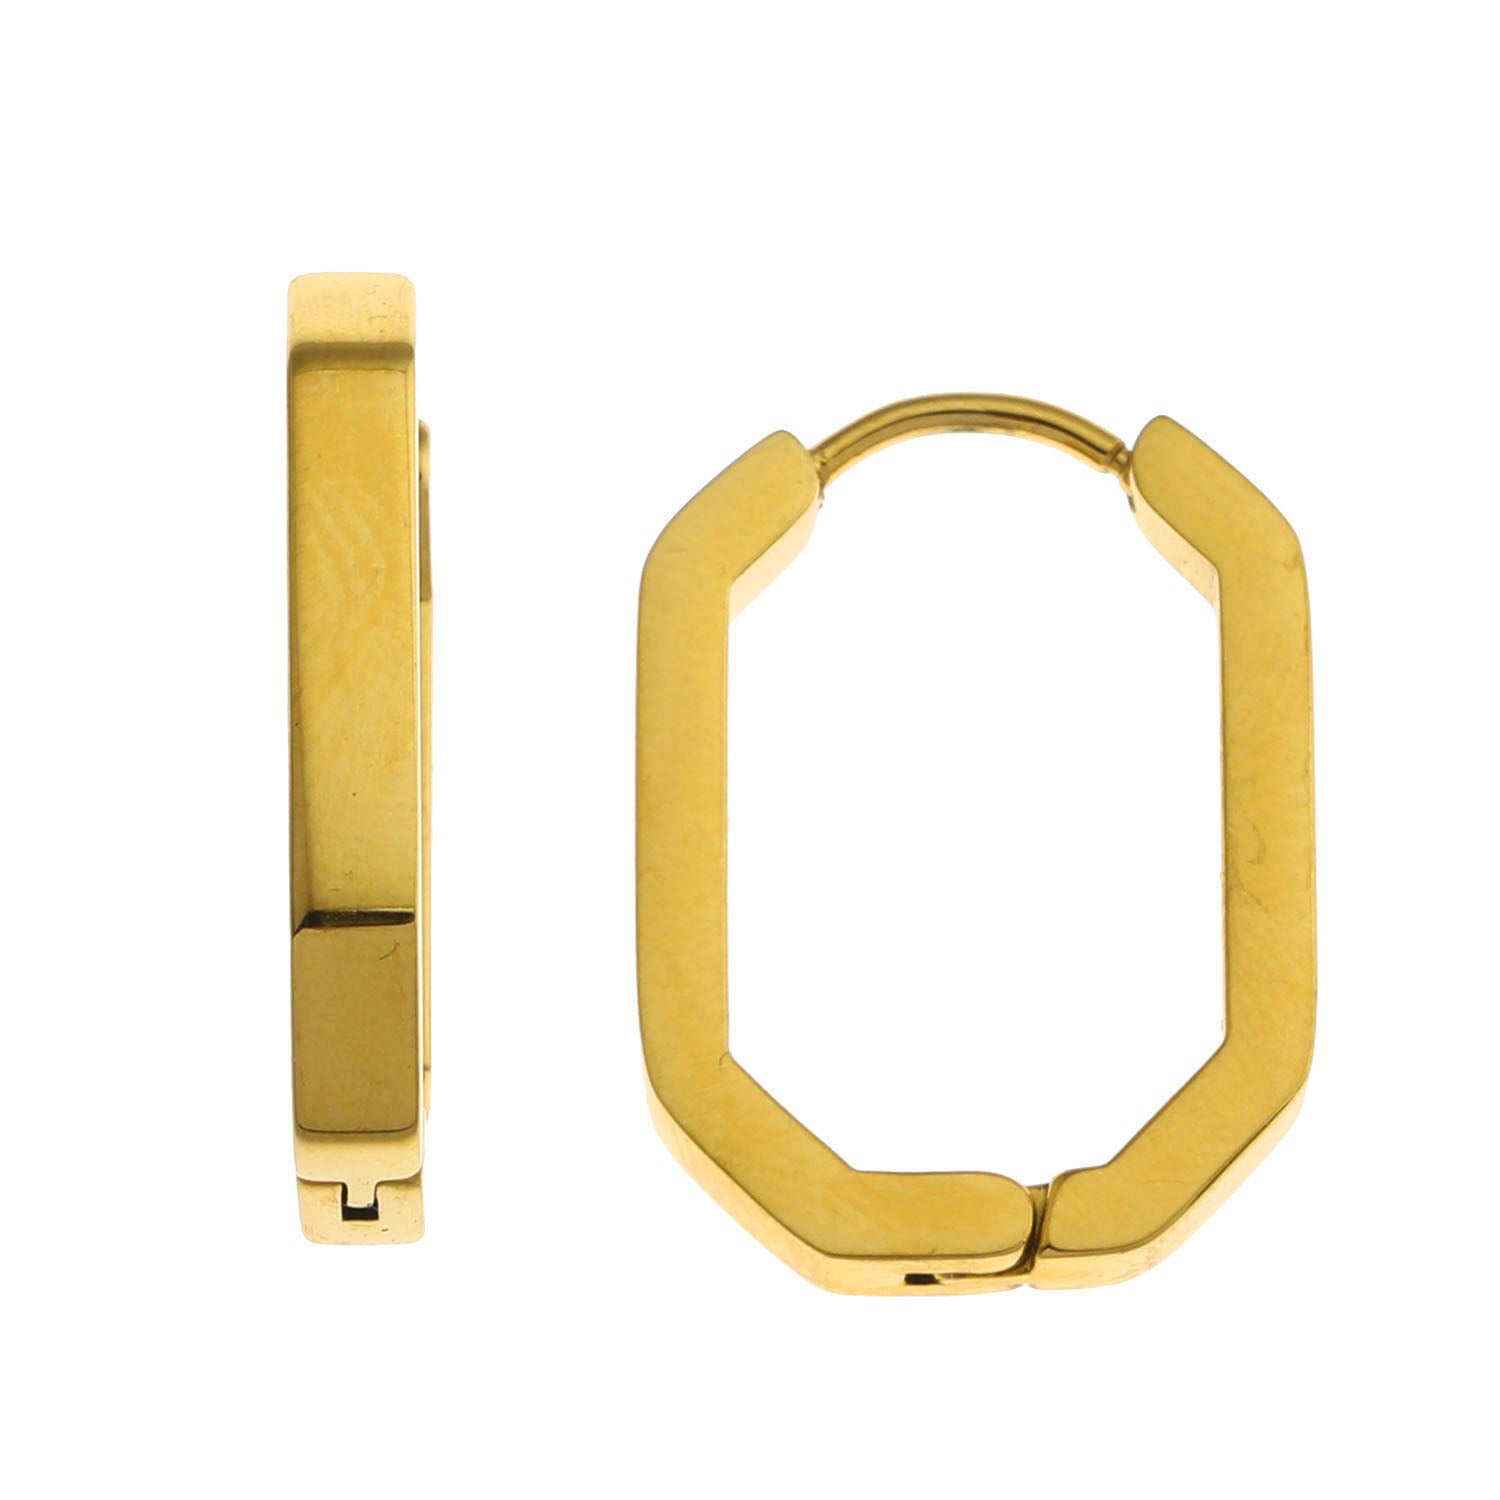 Style: CACCURI 122237 Geometric Shaped Contemporary Hoop Earrings.